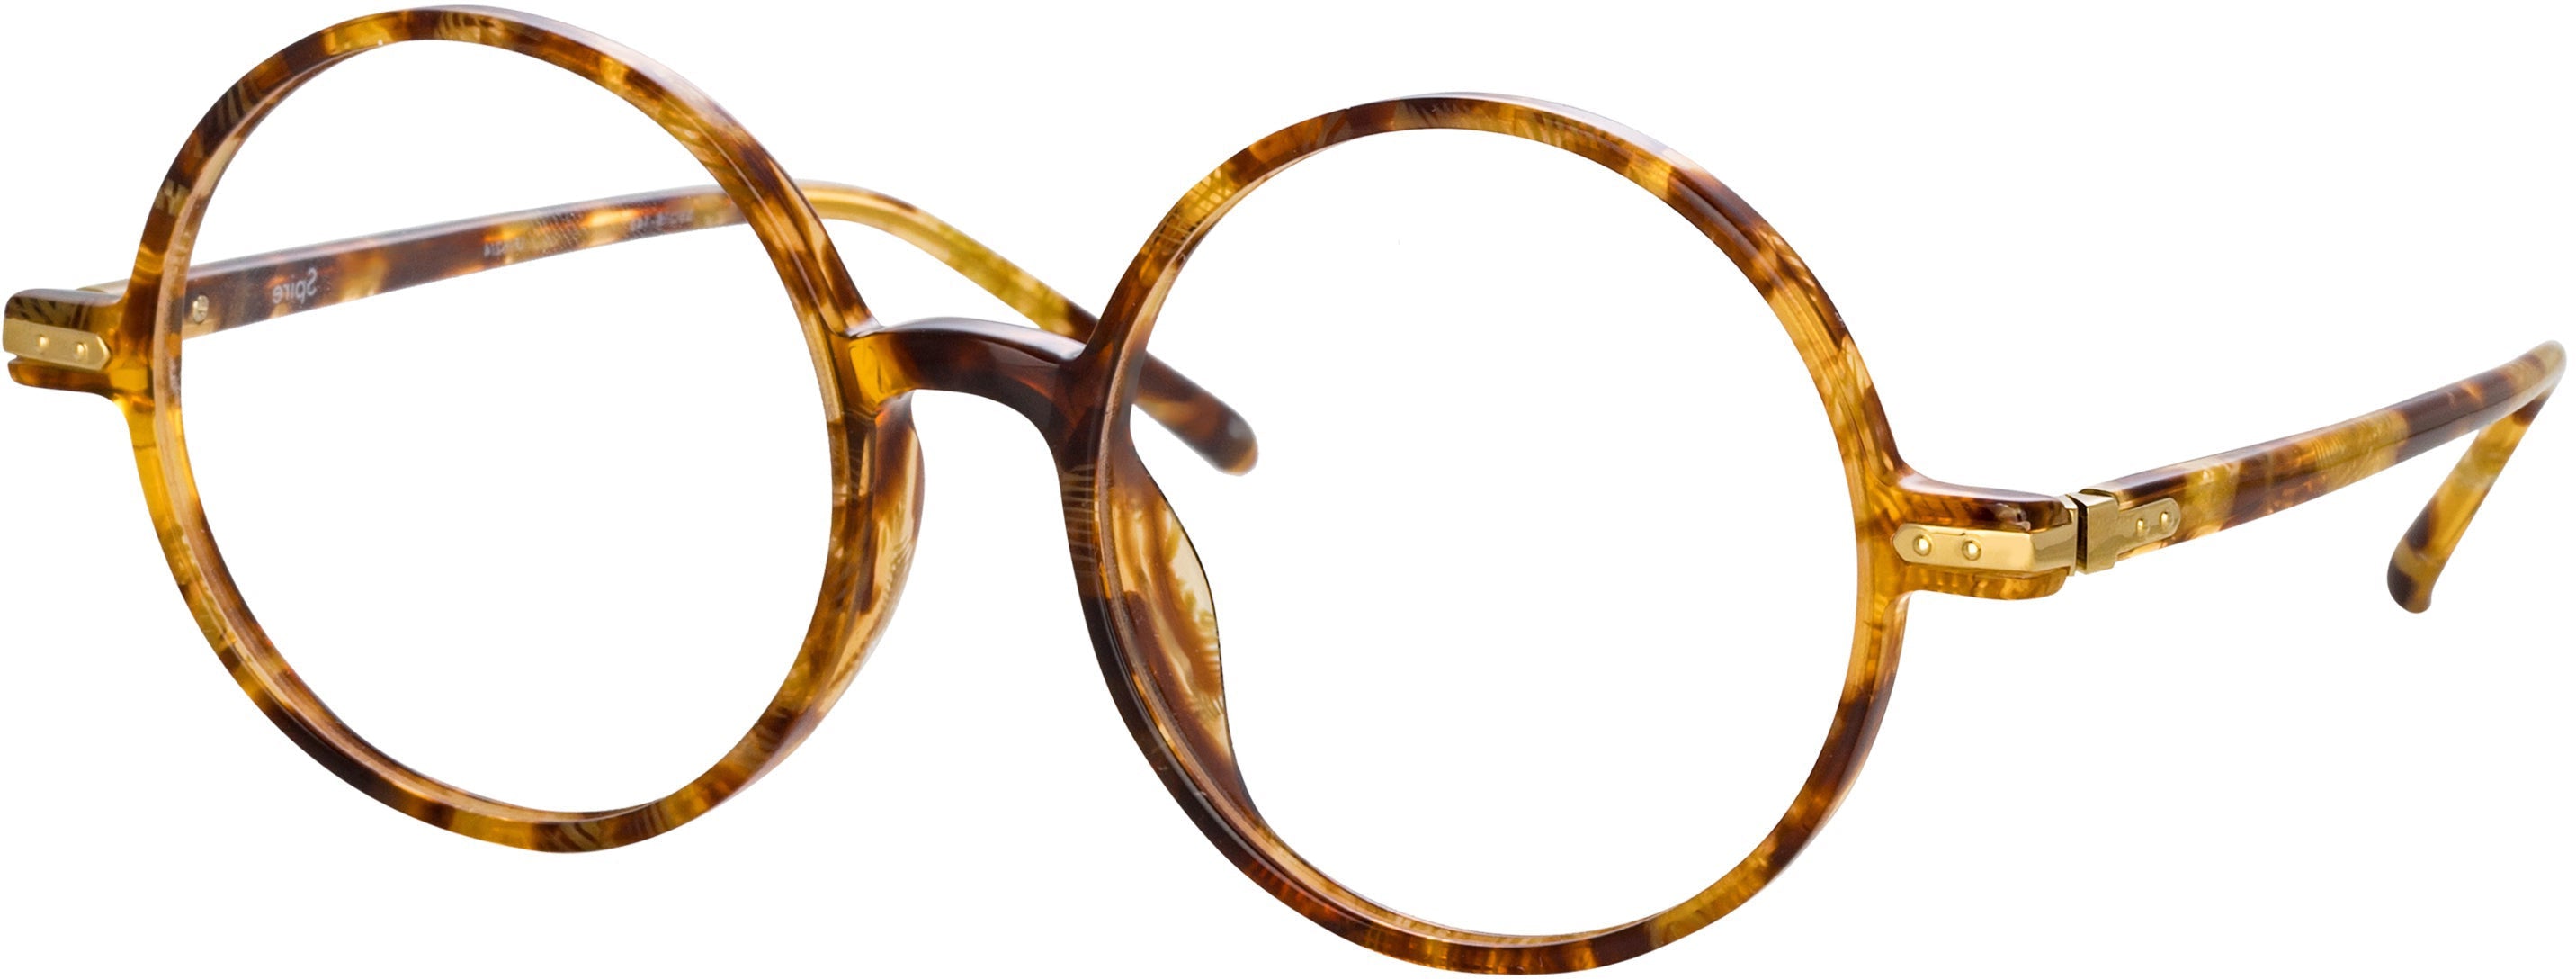 Color_LF62C4OPT - Spire Round Optical Frame in Tobacco Tortoiseshell